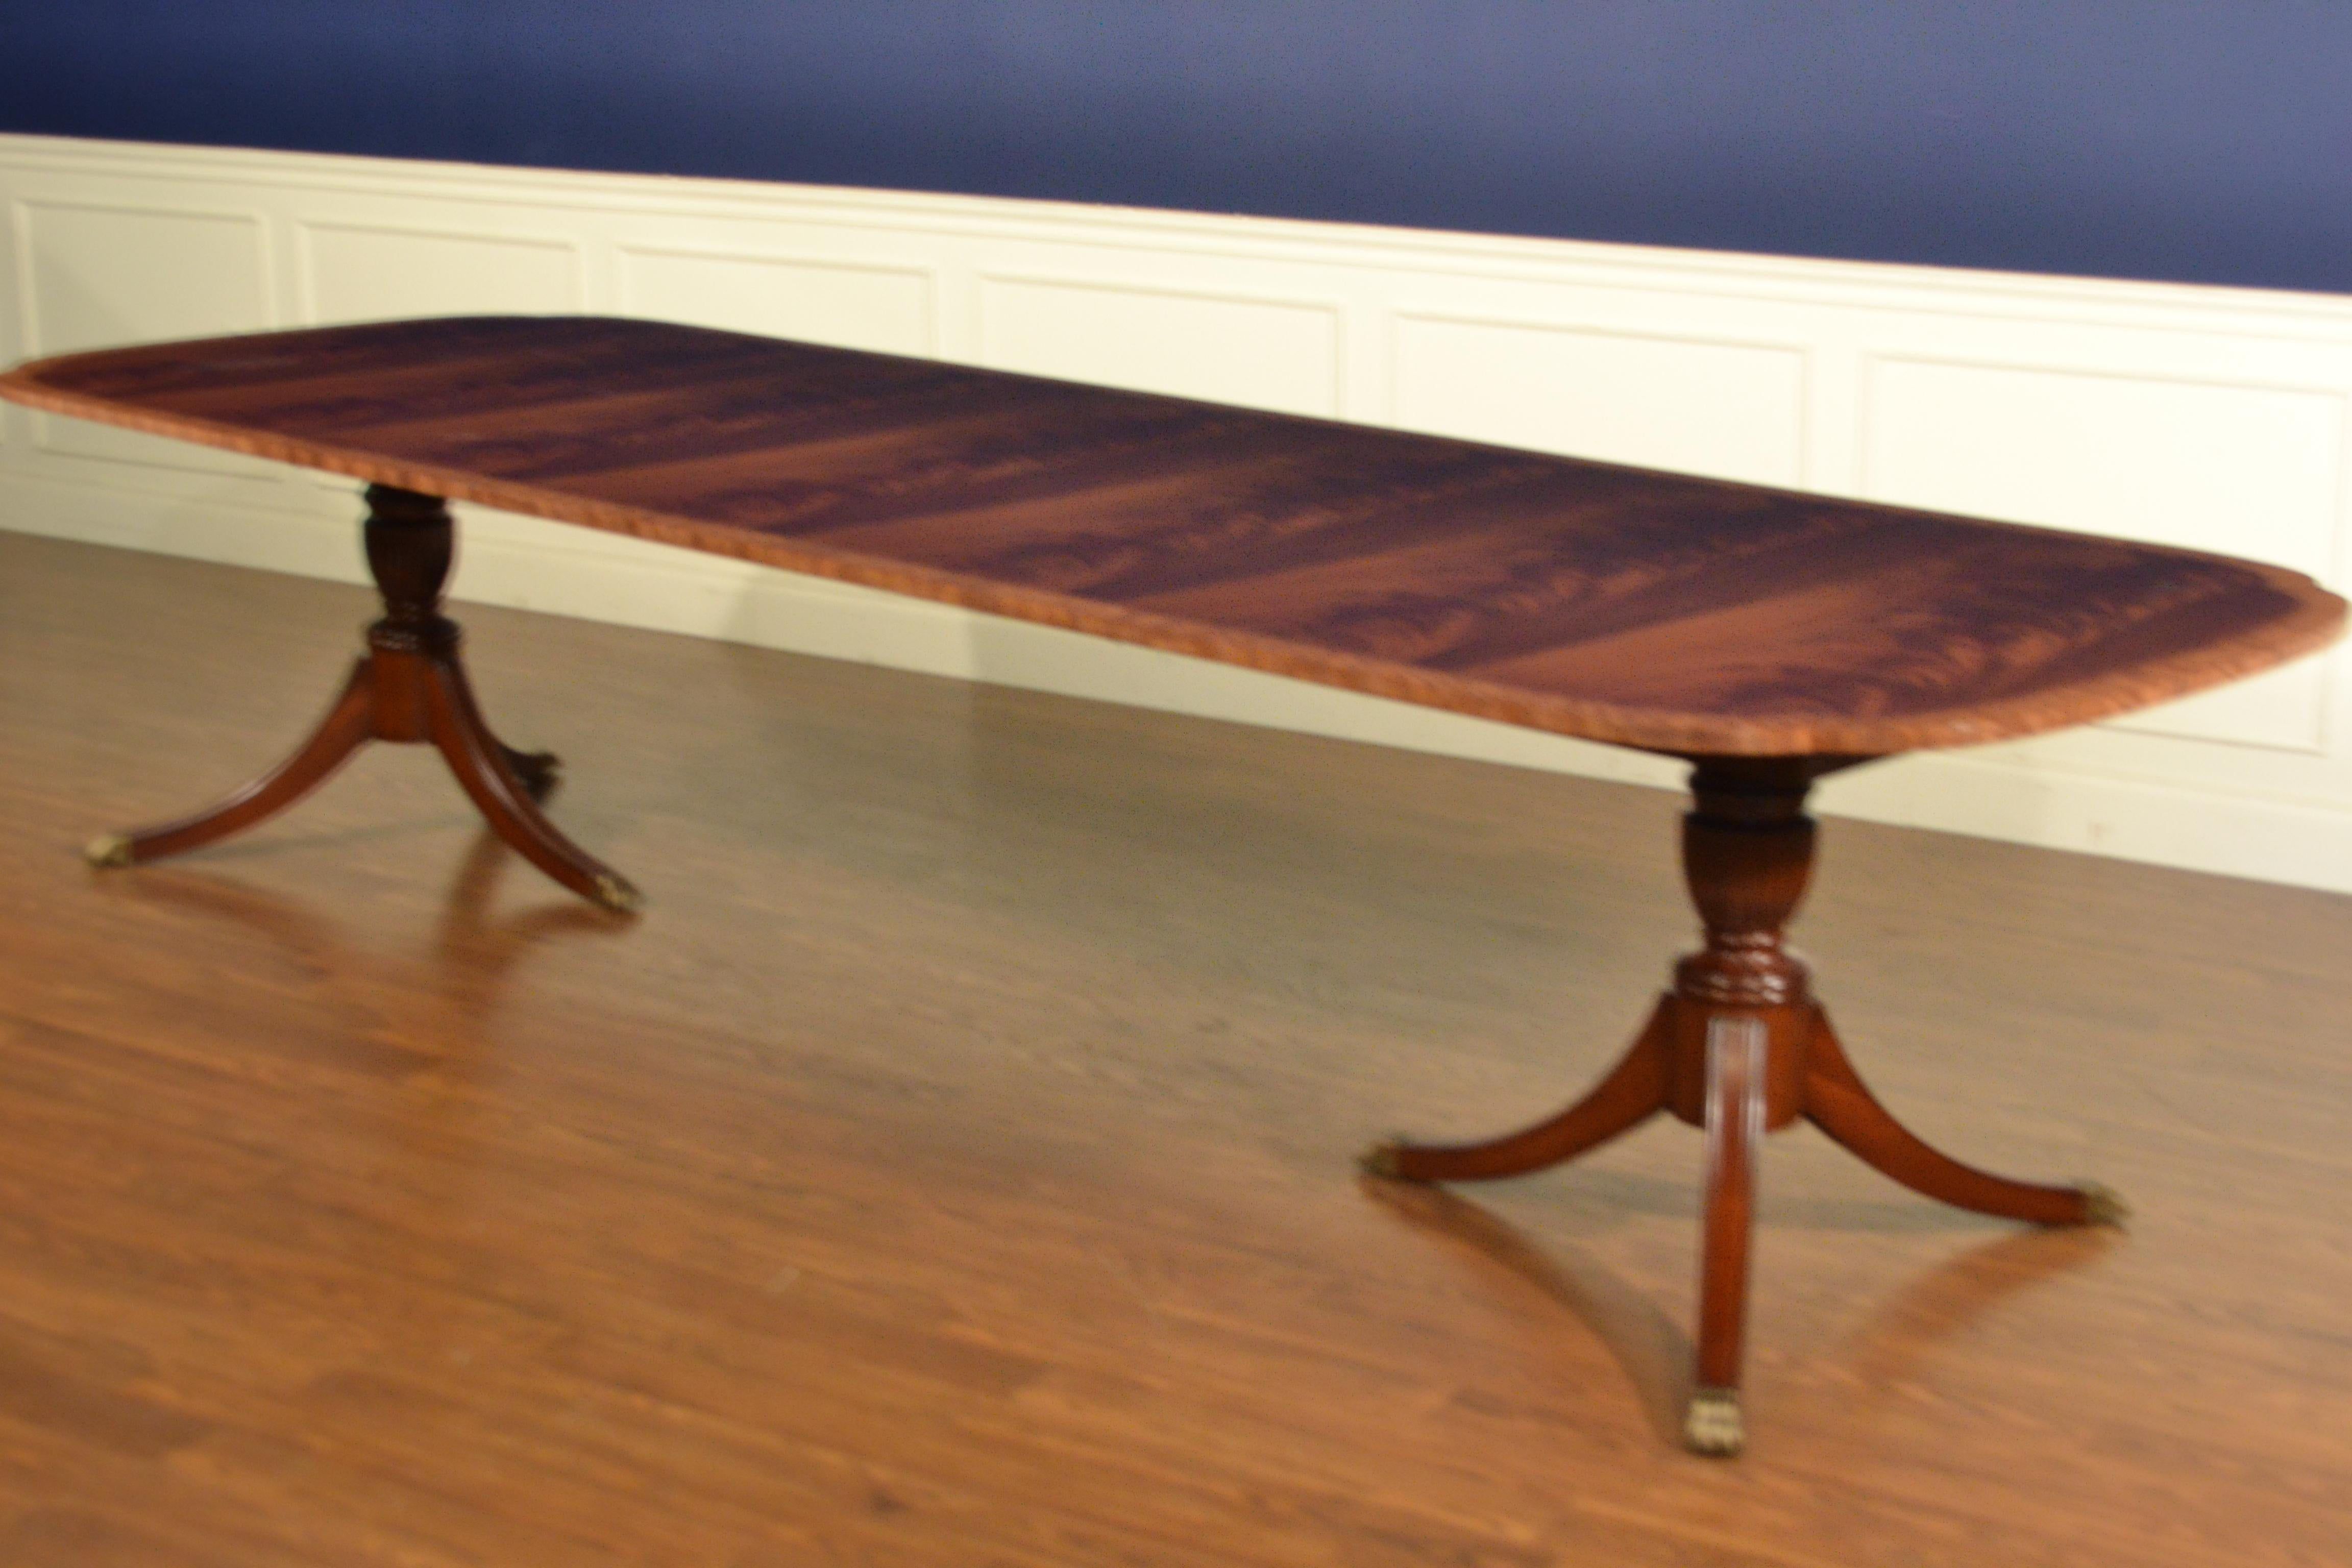 Contemporary Traditional Mahogany Scallop Cornered Dining Table by Leighton Hall